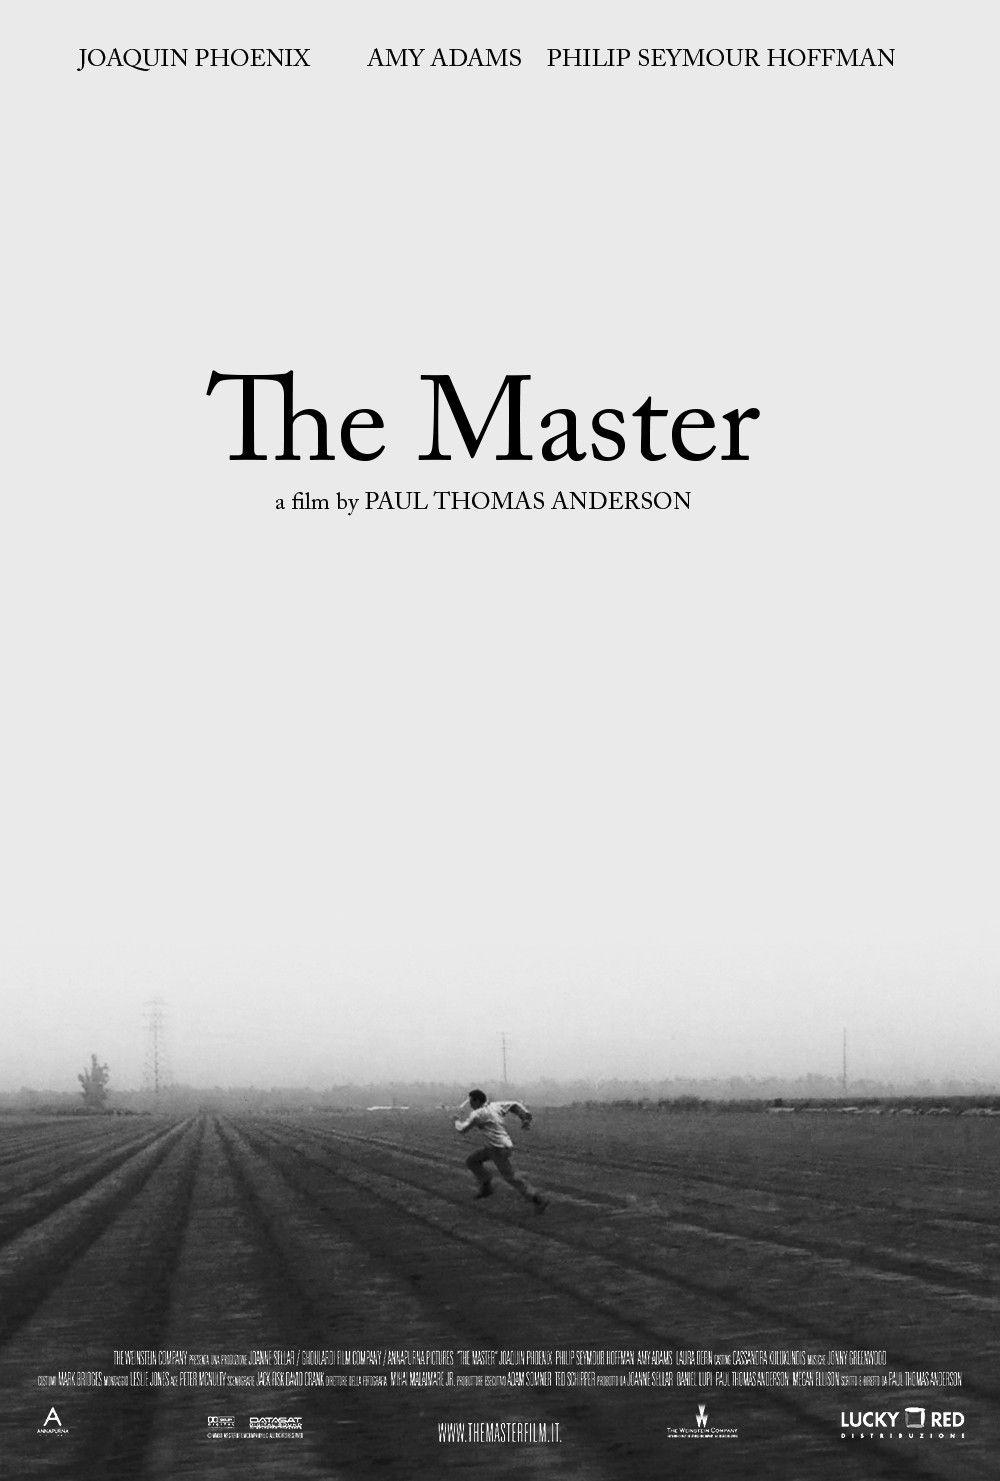 The Master (My personal phone wallpaper). Film poster